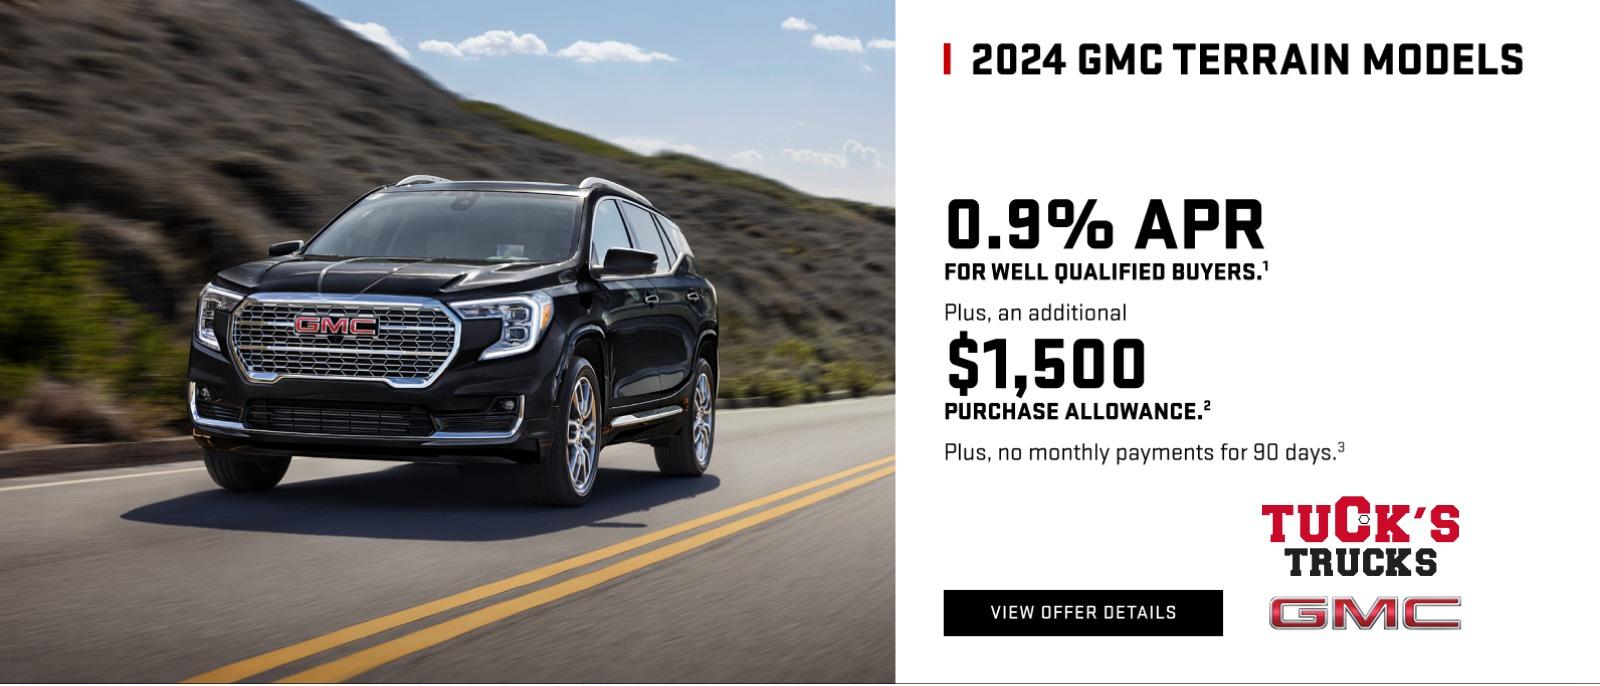 2024 GMC Terrain with 0.9% APR for well-qualified buyers. Plus, receive an additional $1,500 PURCHASE ALLOWANCE. Plus, no monthly payments for 90 days